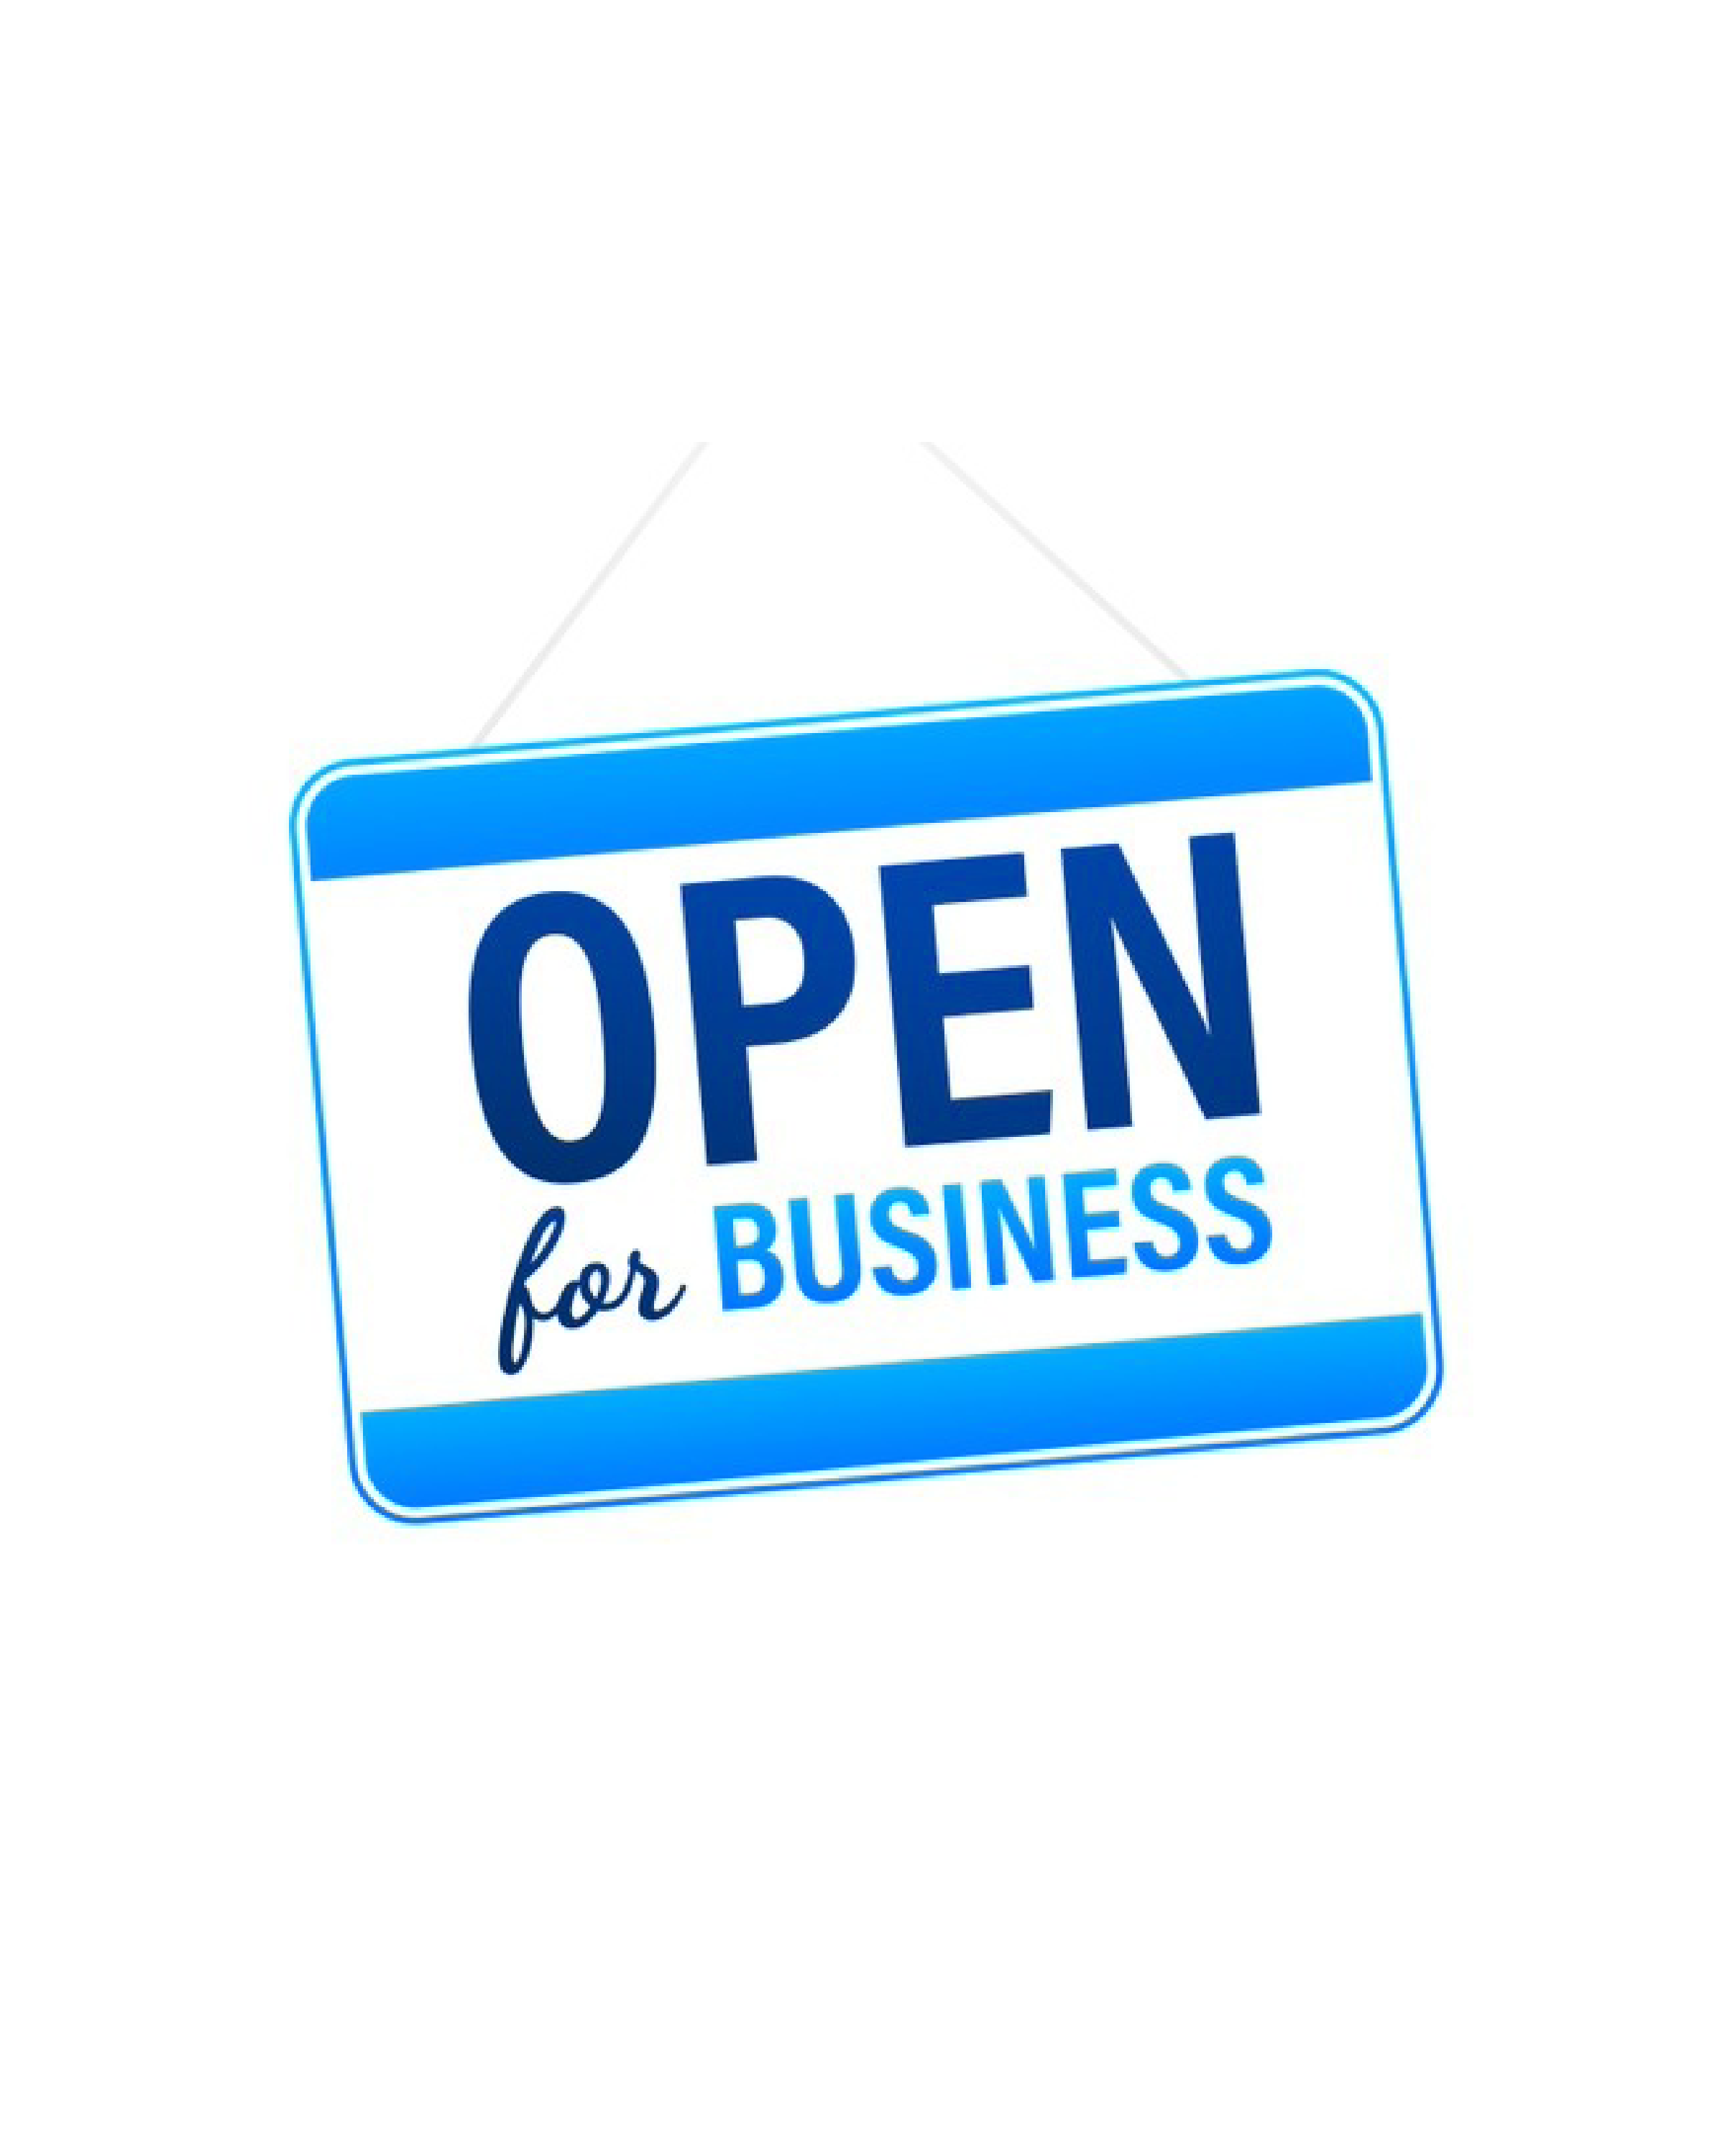 Utah small business want to stay open in Park City UTAH